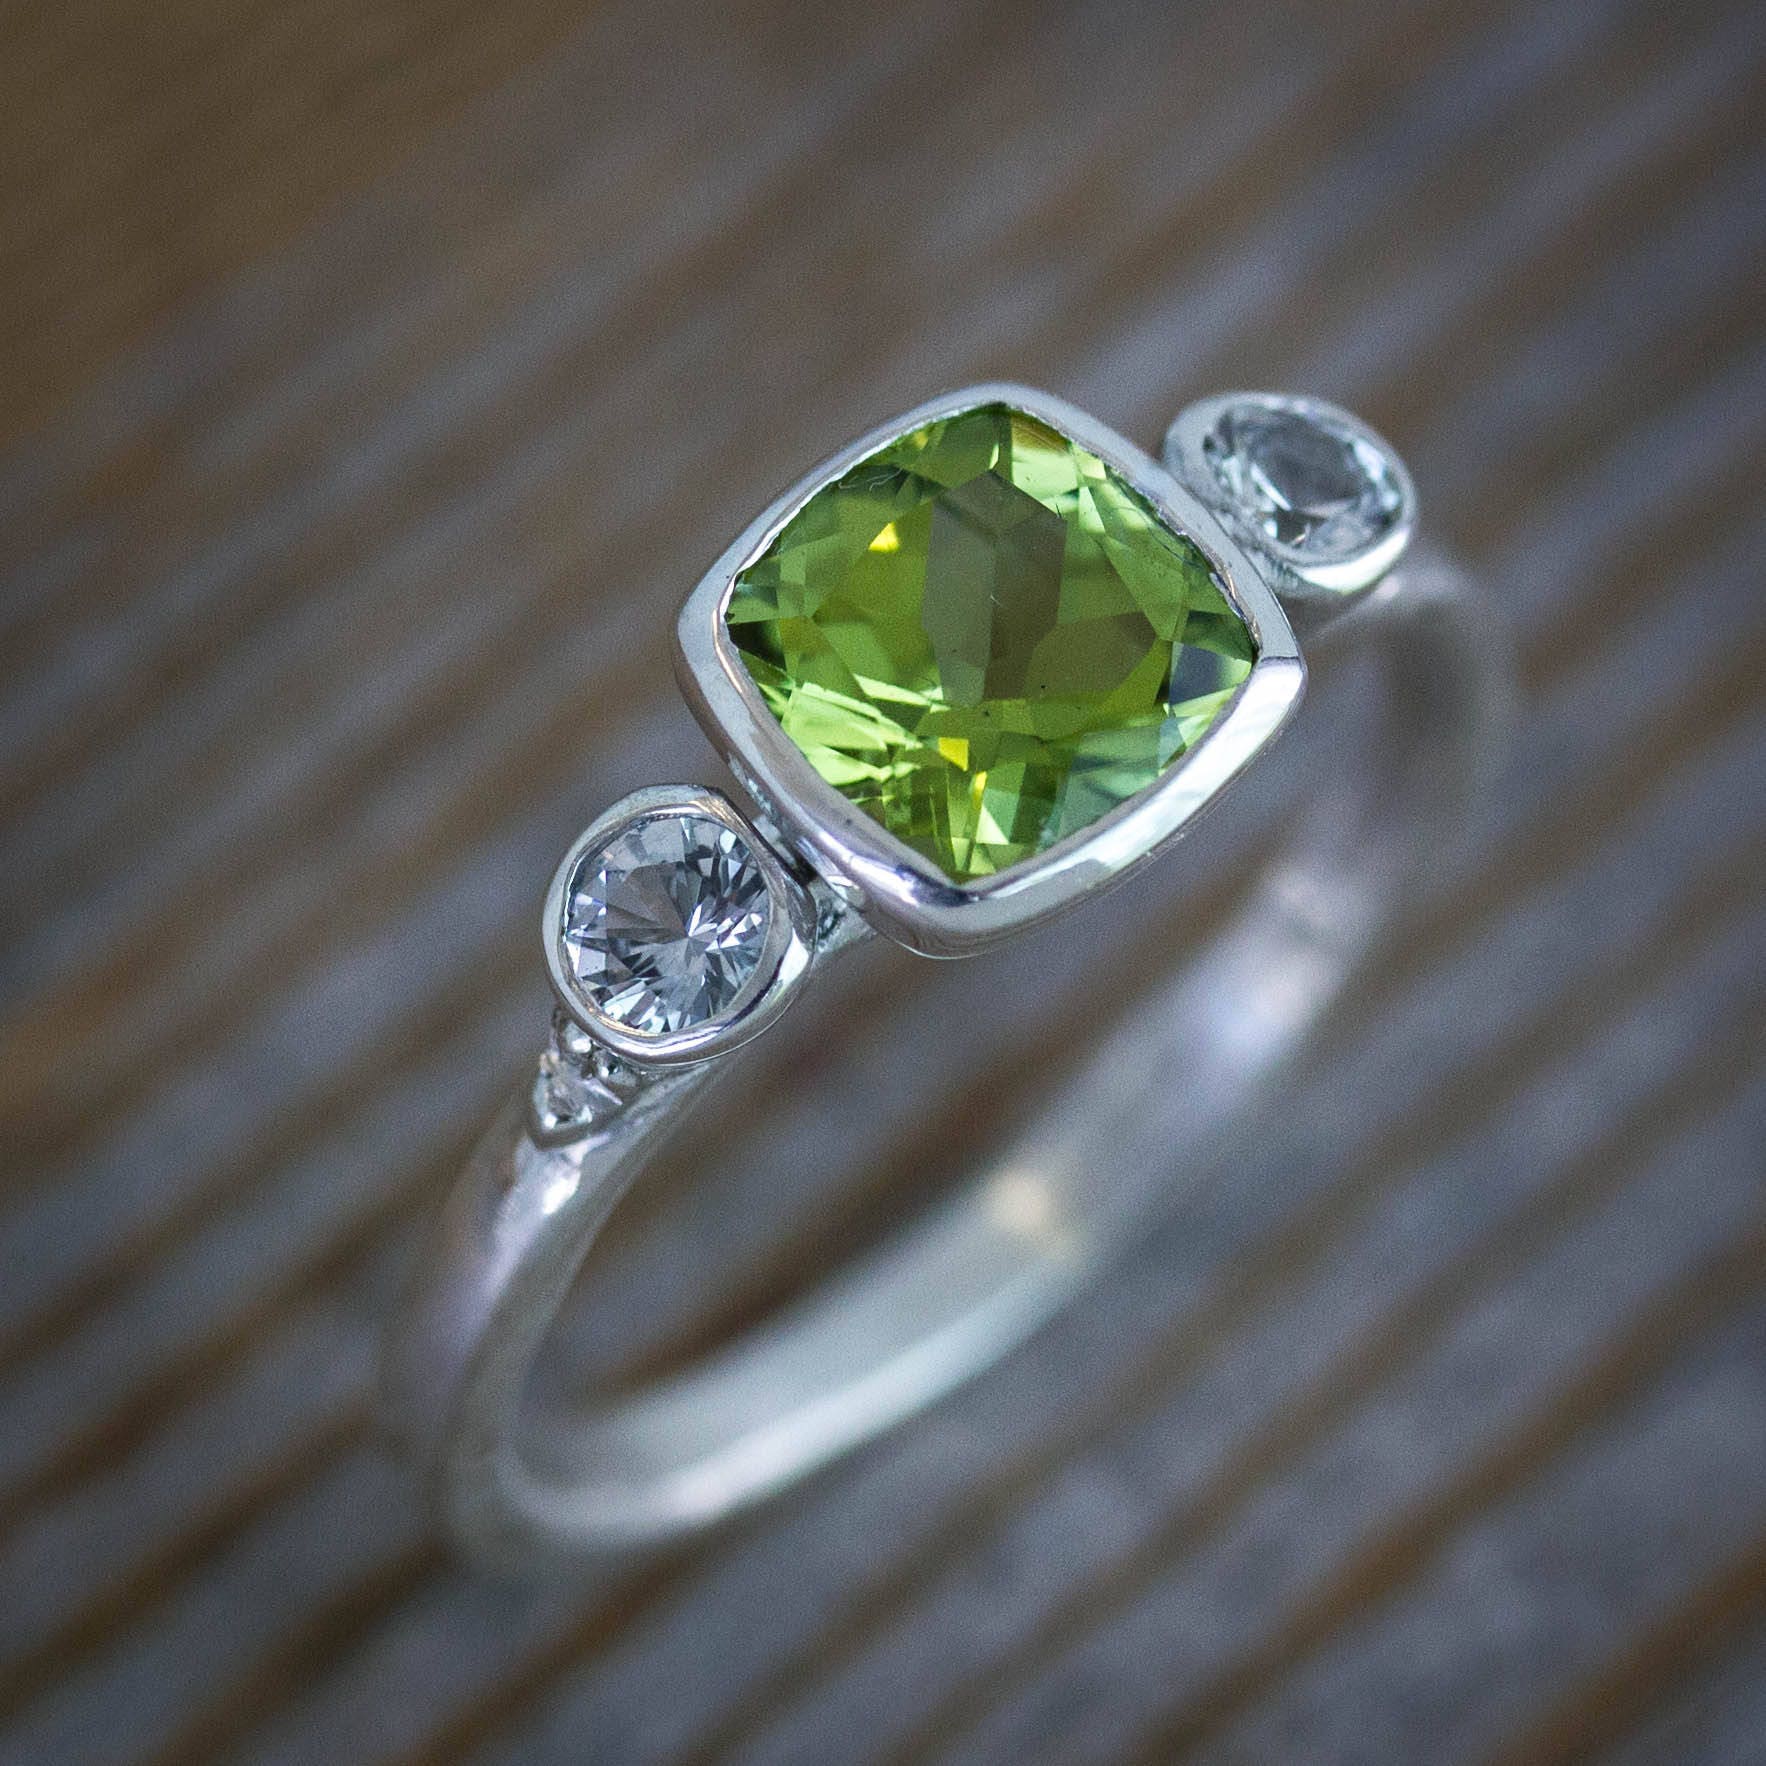 Sterling Silver 92.5 % Peridot Stone Ring at Best Price in Jaipur | Segue  Gems